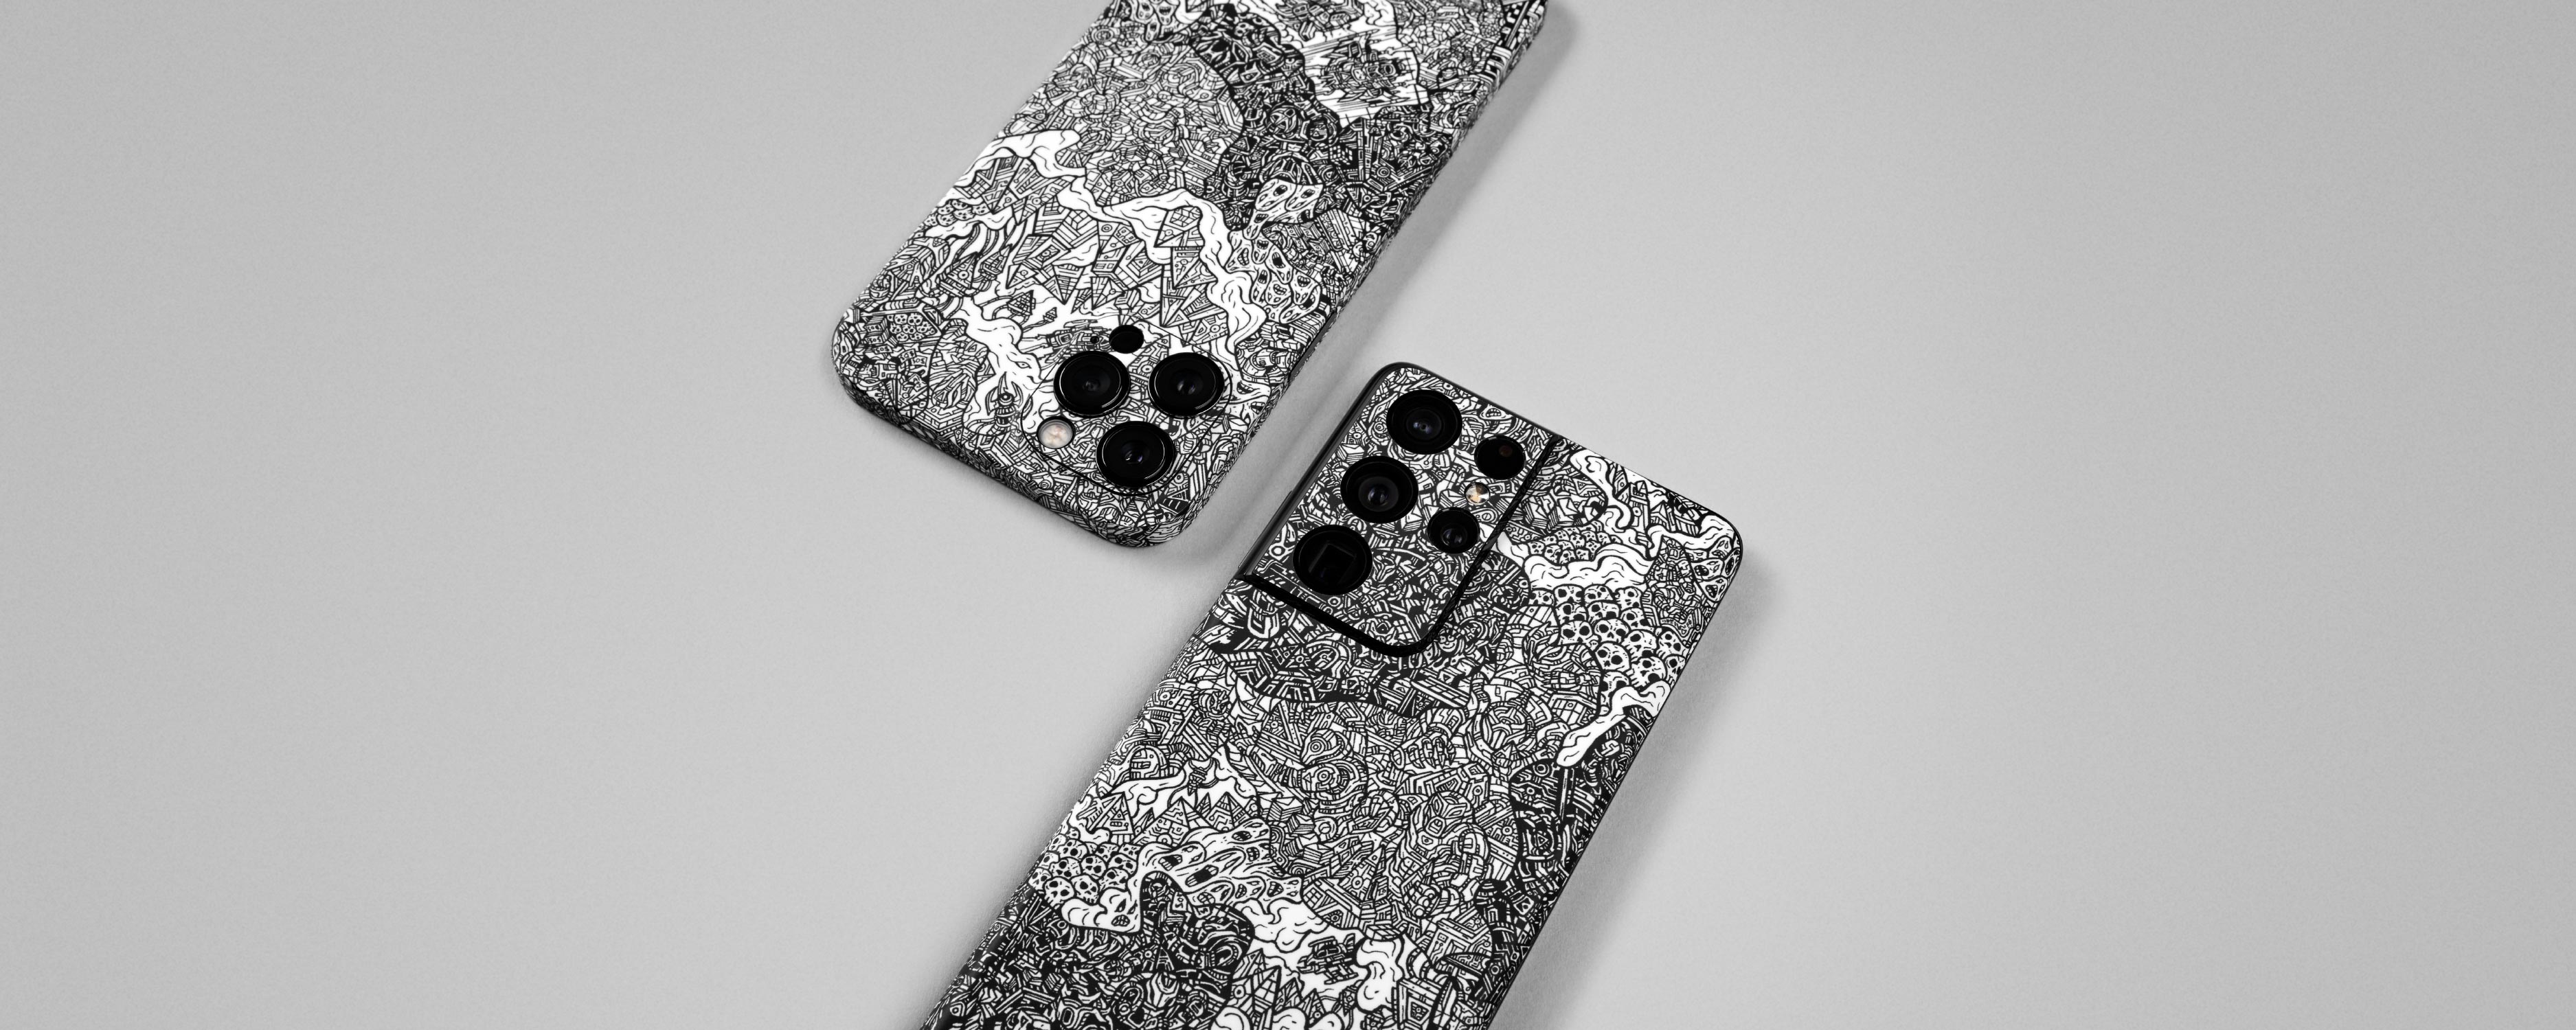 iPhone XS Max Skins, Wraps & Covers » dbrand